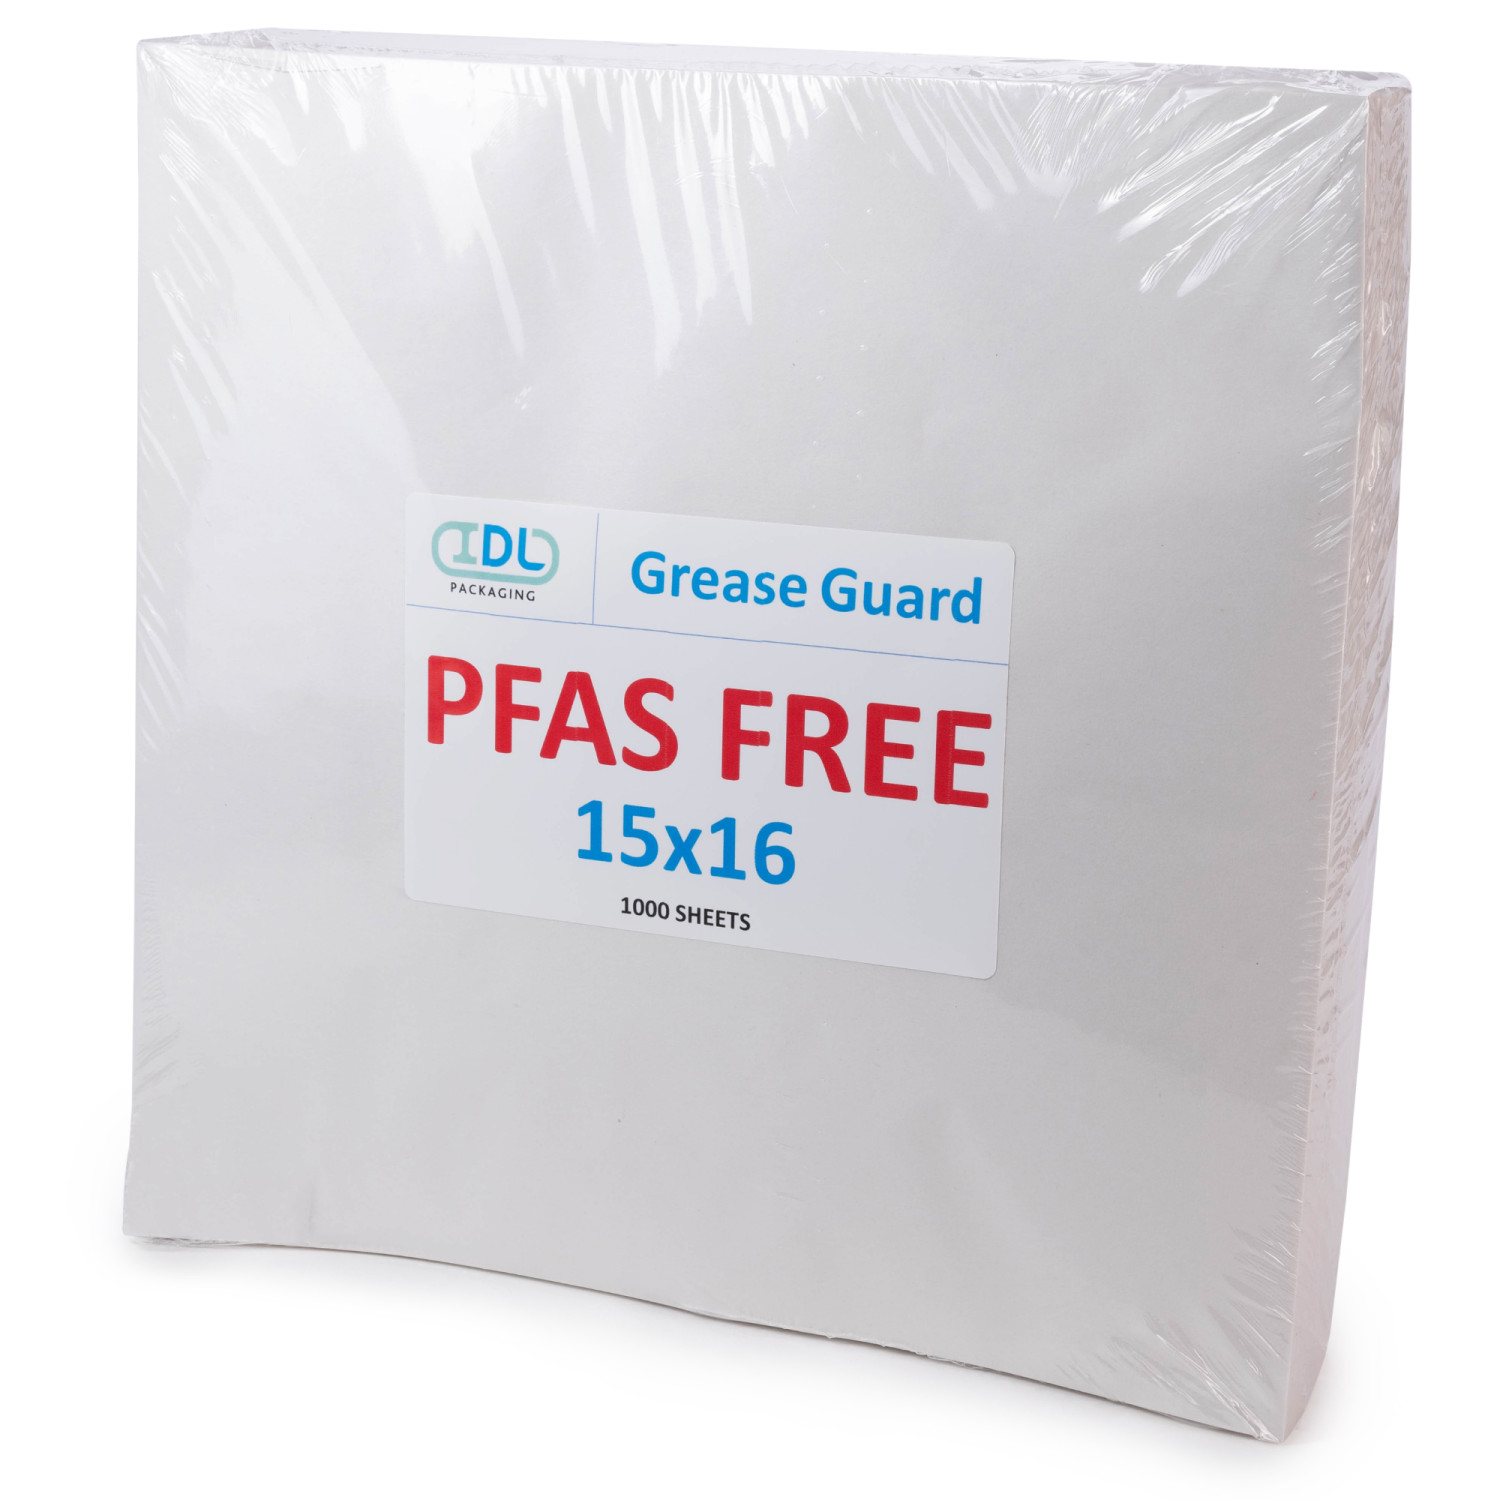 https://idlpack.com/image/cache/catalog/Grease%20Proof%20Paper%20Sheets/2000%20px_Grease-Giard-15x16-11_white_bg%201-1500x1500.jpg